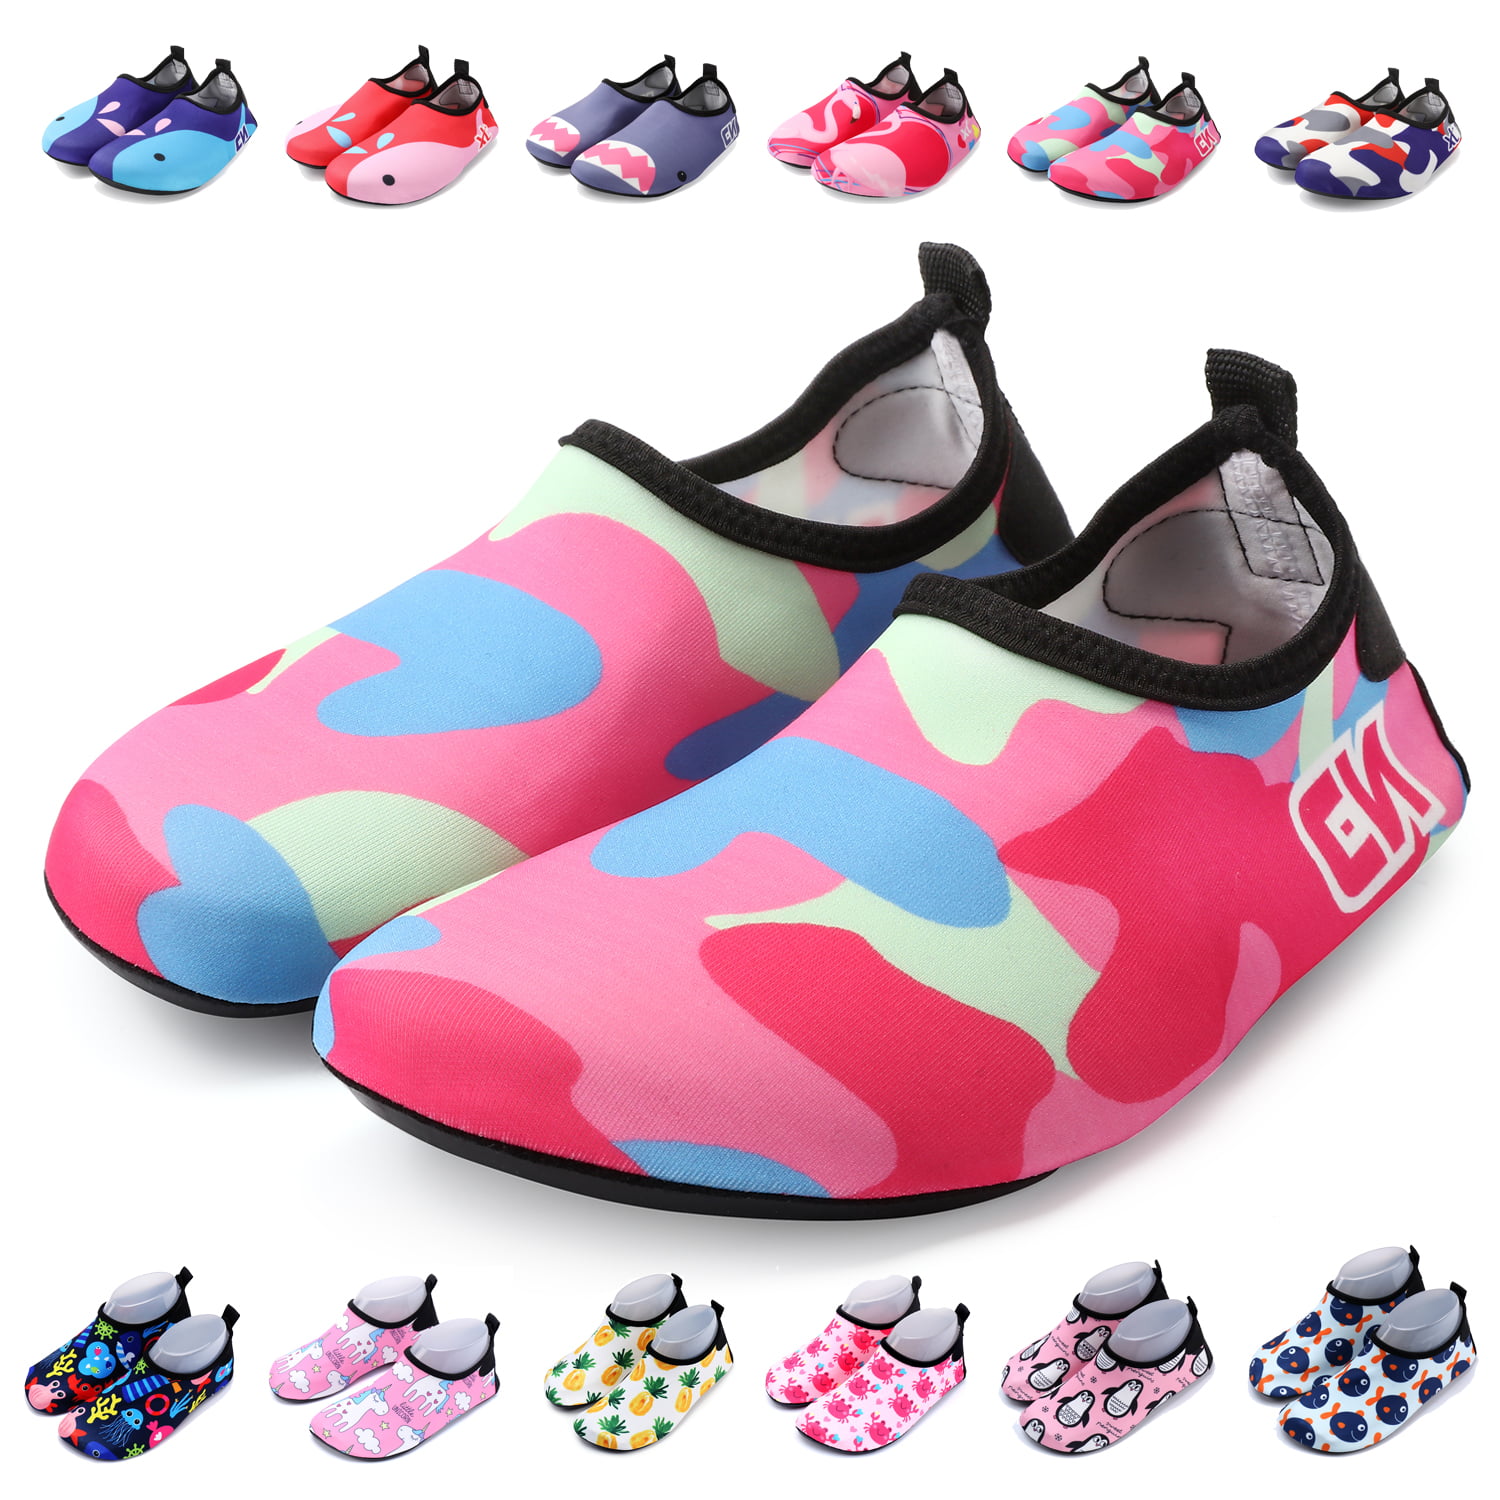 Bridawn Kids Water Shoes Barefoot Shoes 